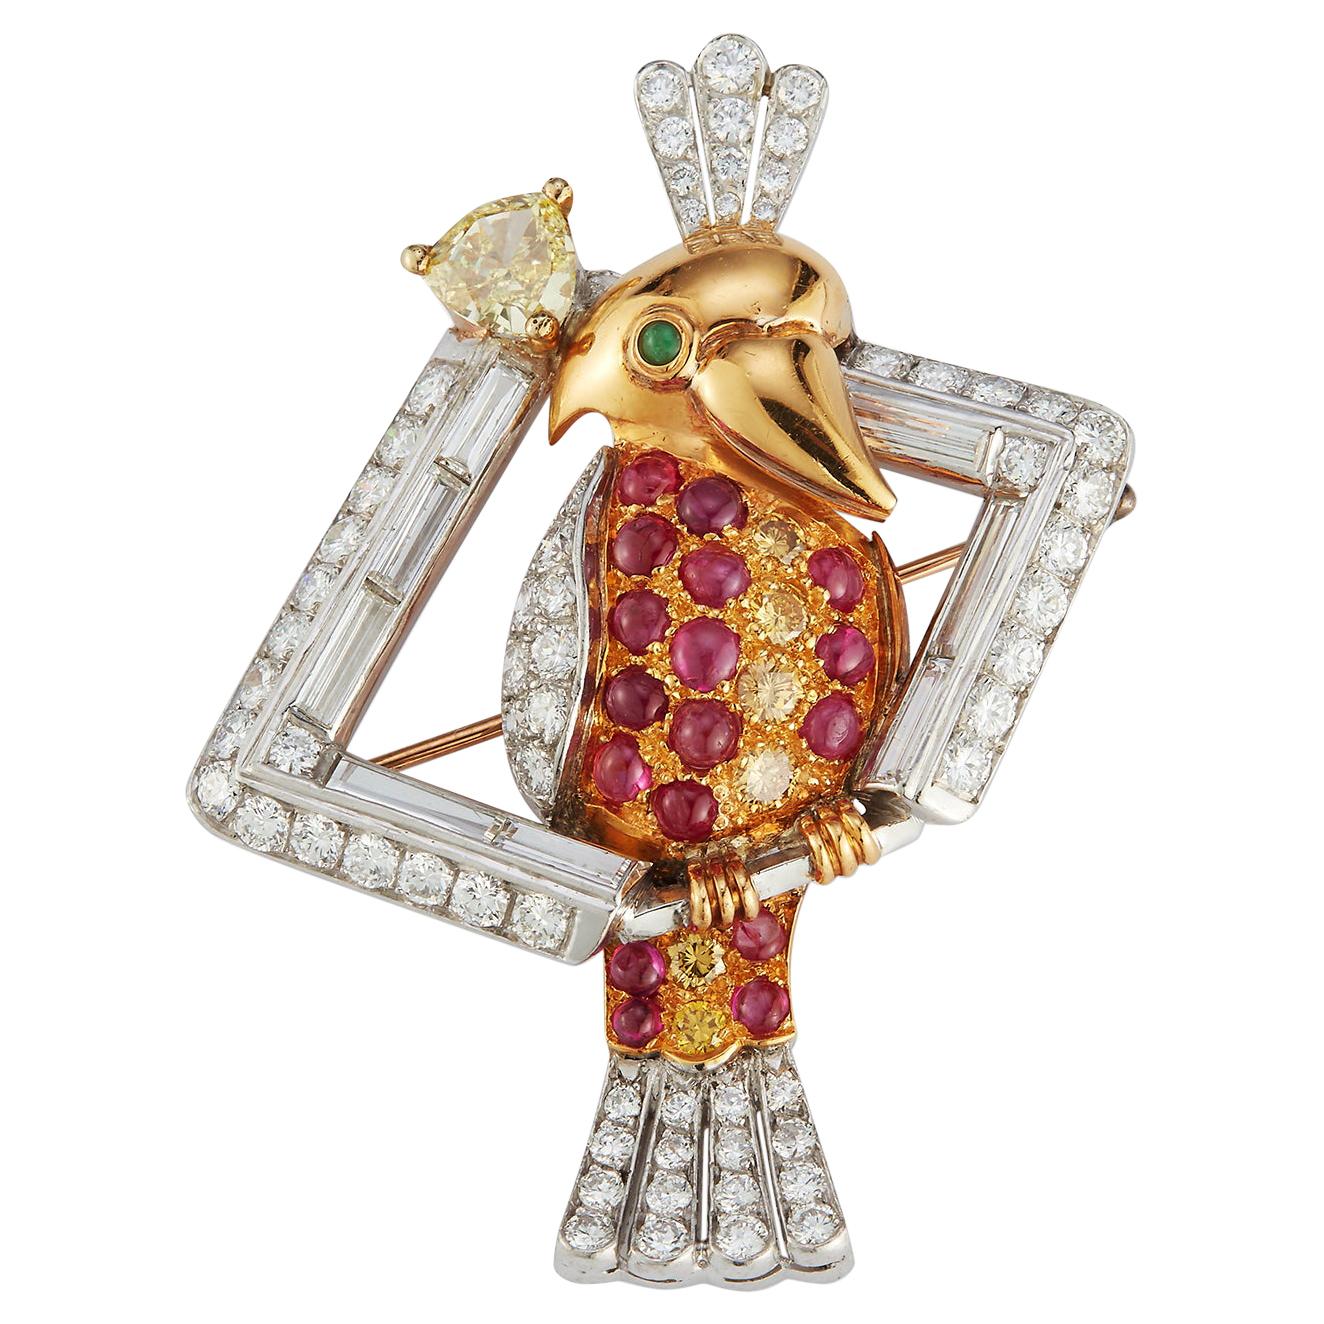 Diamond and Ruby Parrot Brooch with Emerald Eye